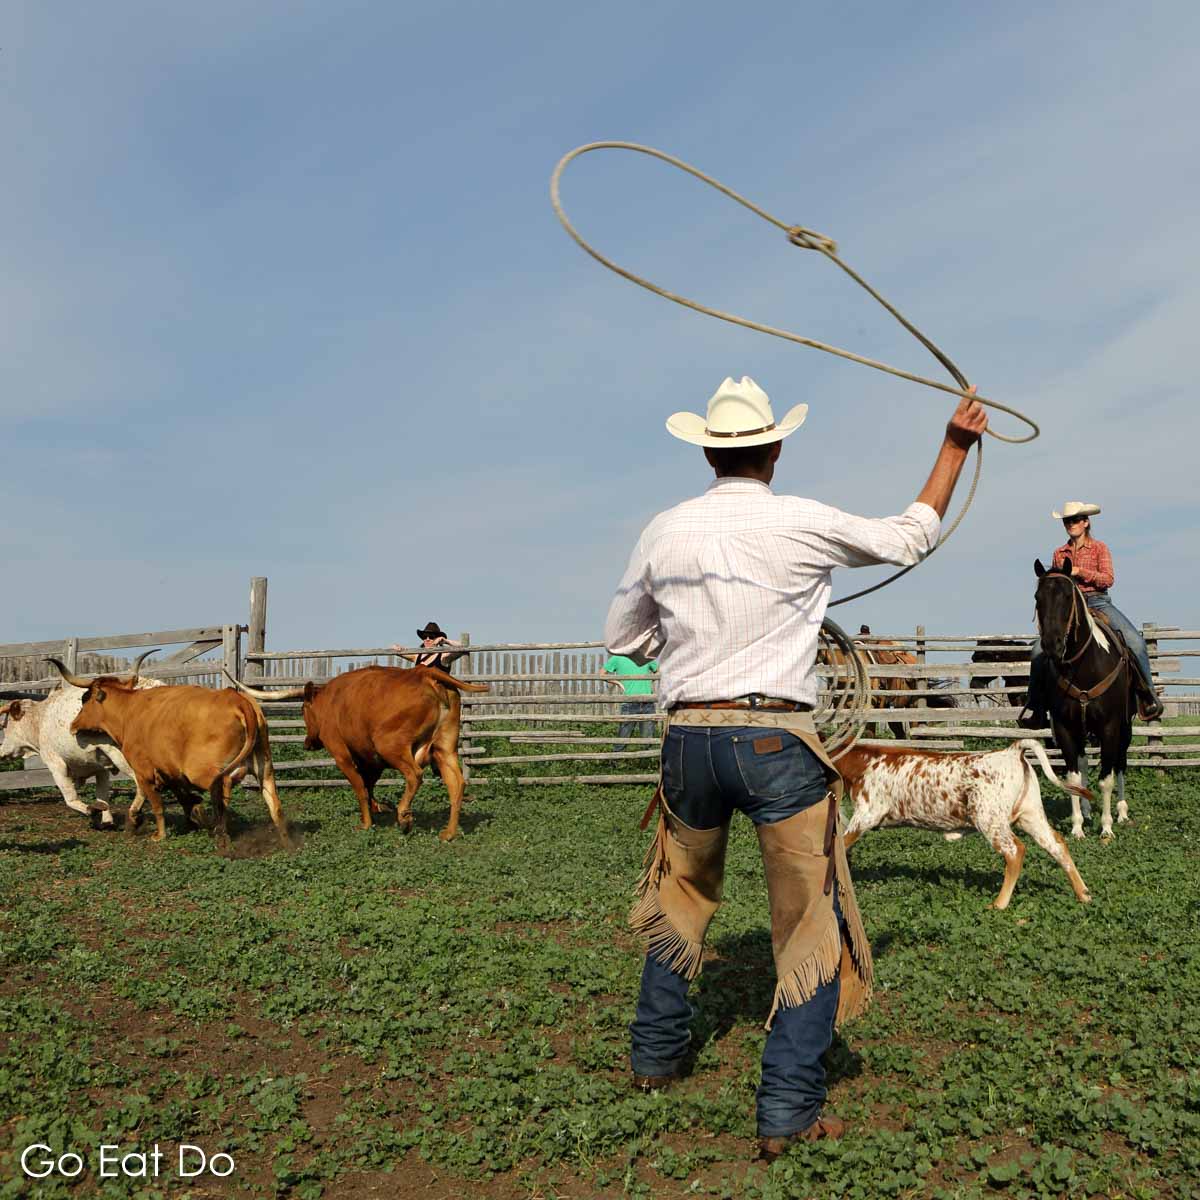 George Gaber, dressed in a Stetson and leather chaps, using a lasso to rope cattle at La Reata Ranch in Saskatchewan, Canada